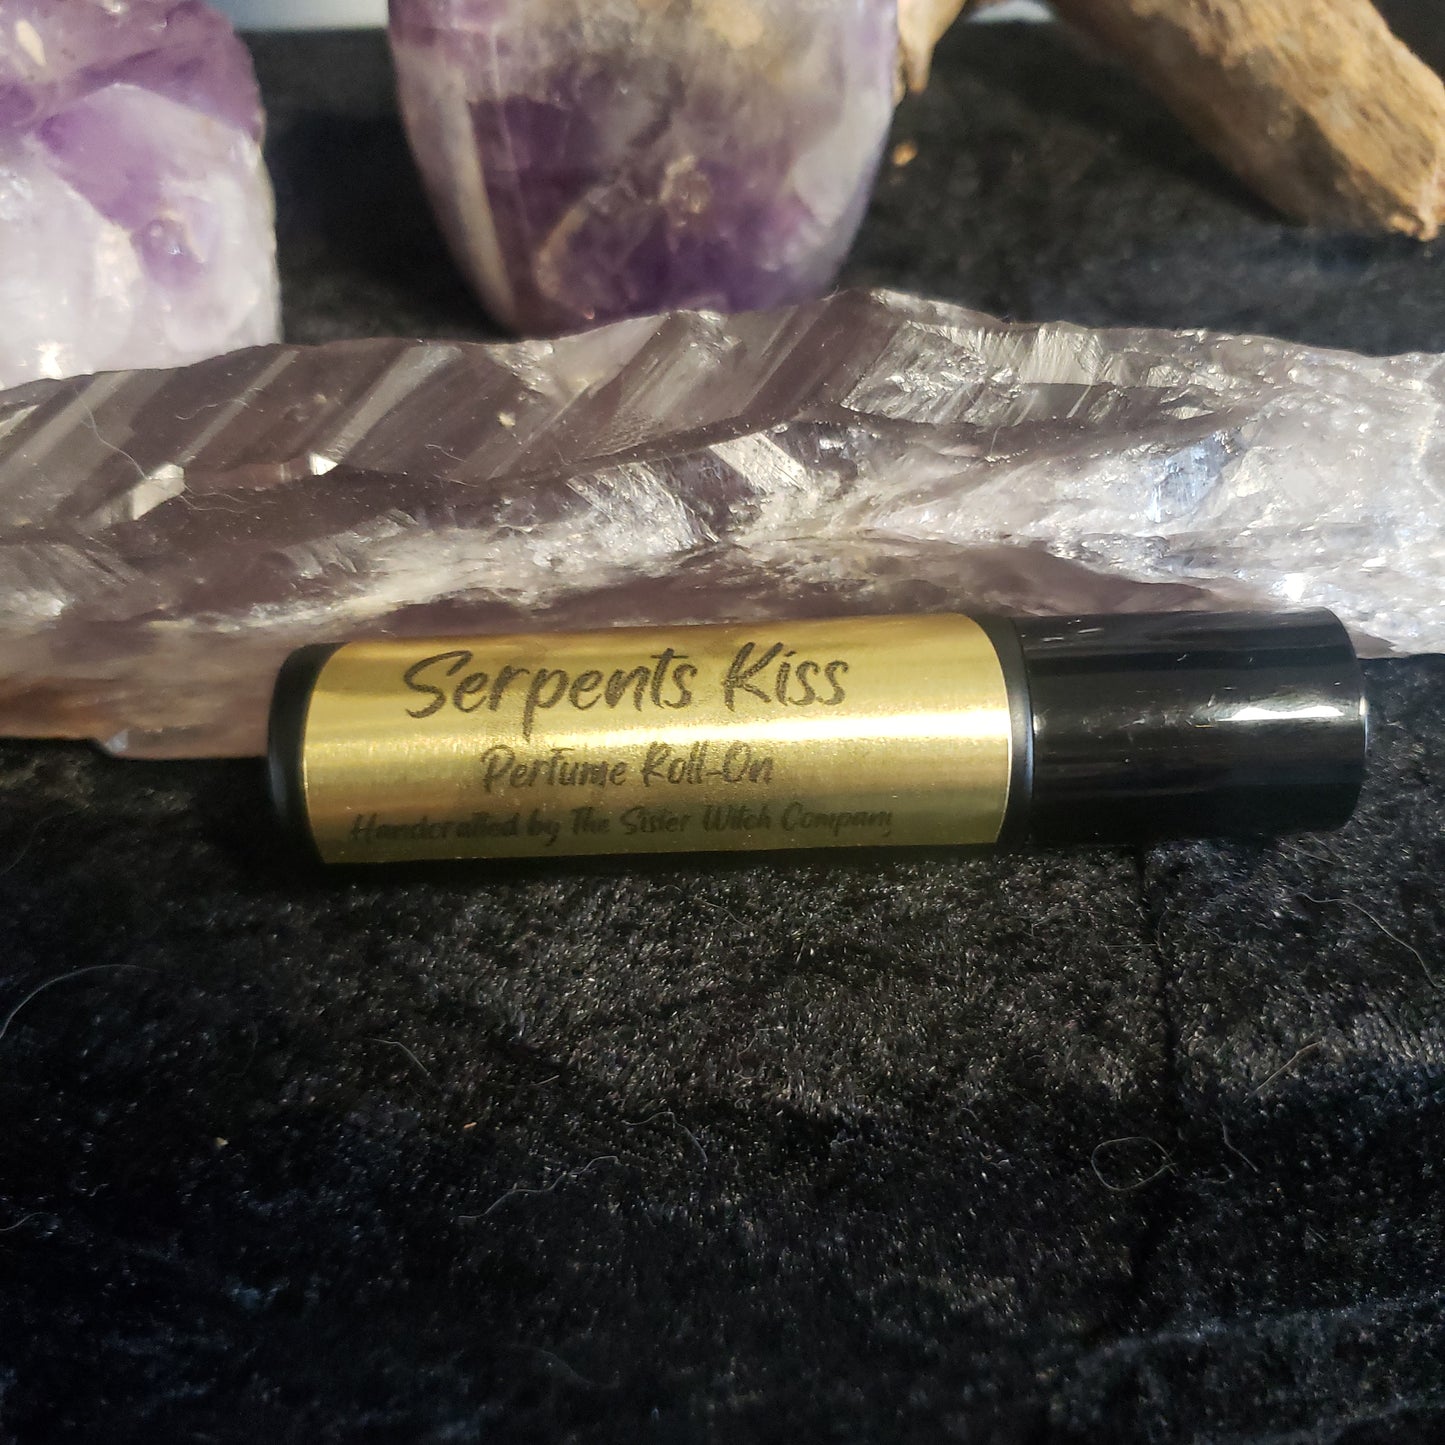 Serpents Kiss Product Line